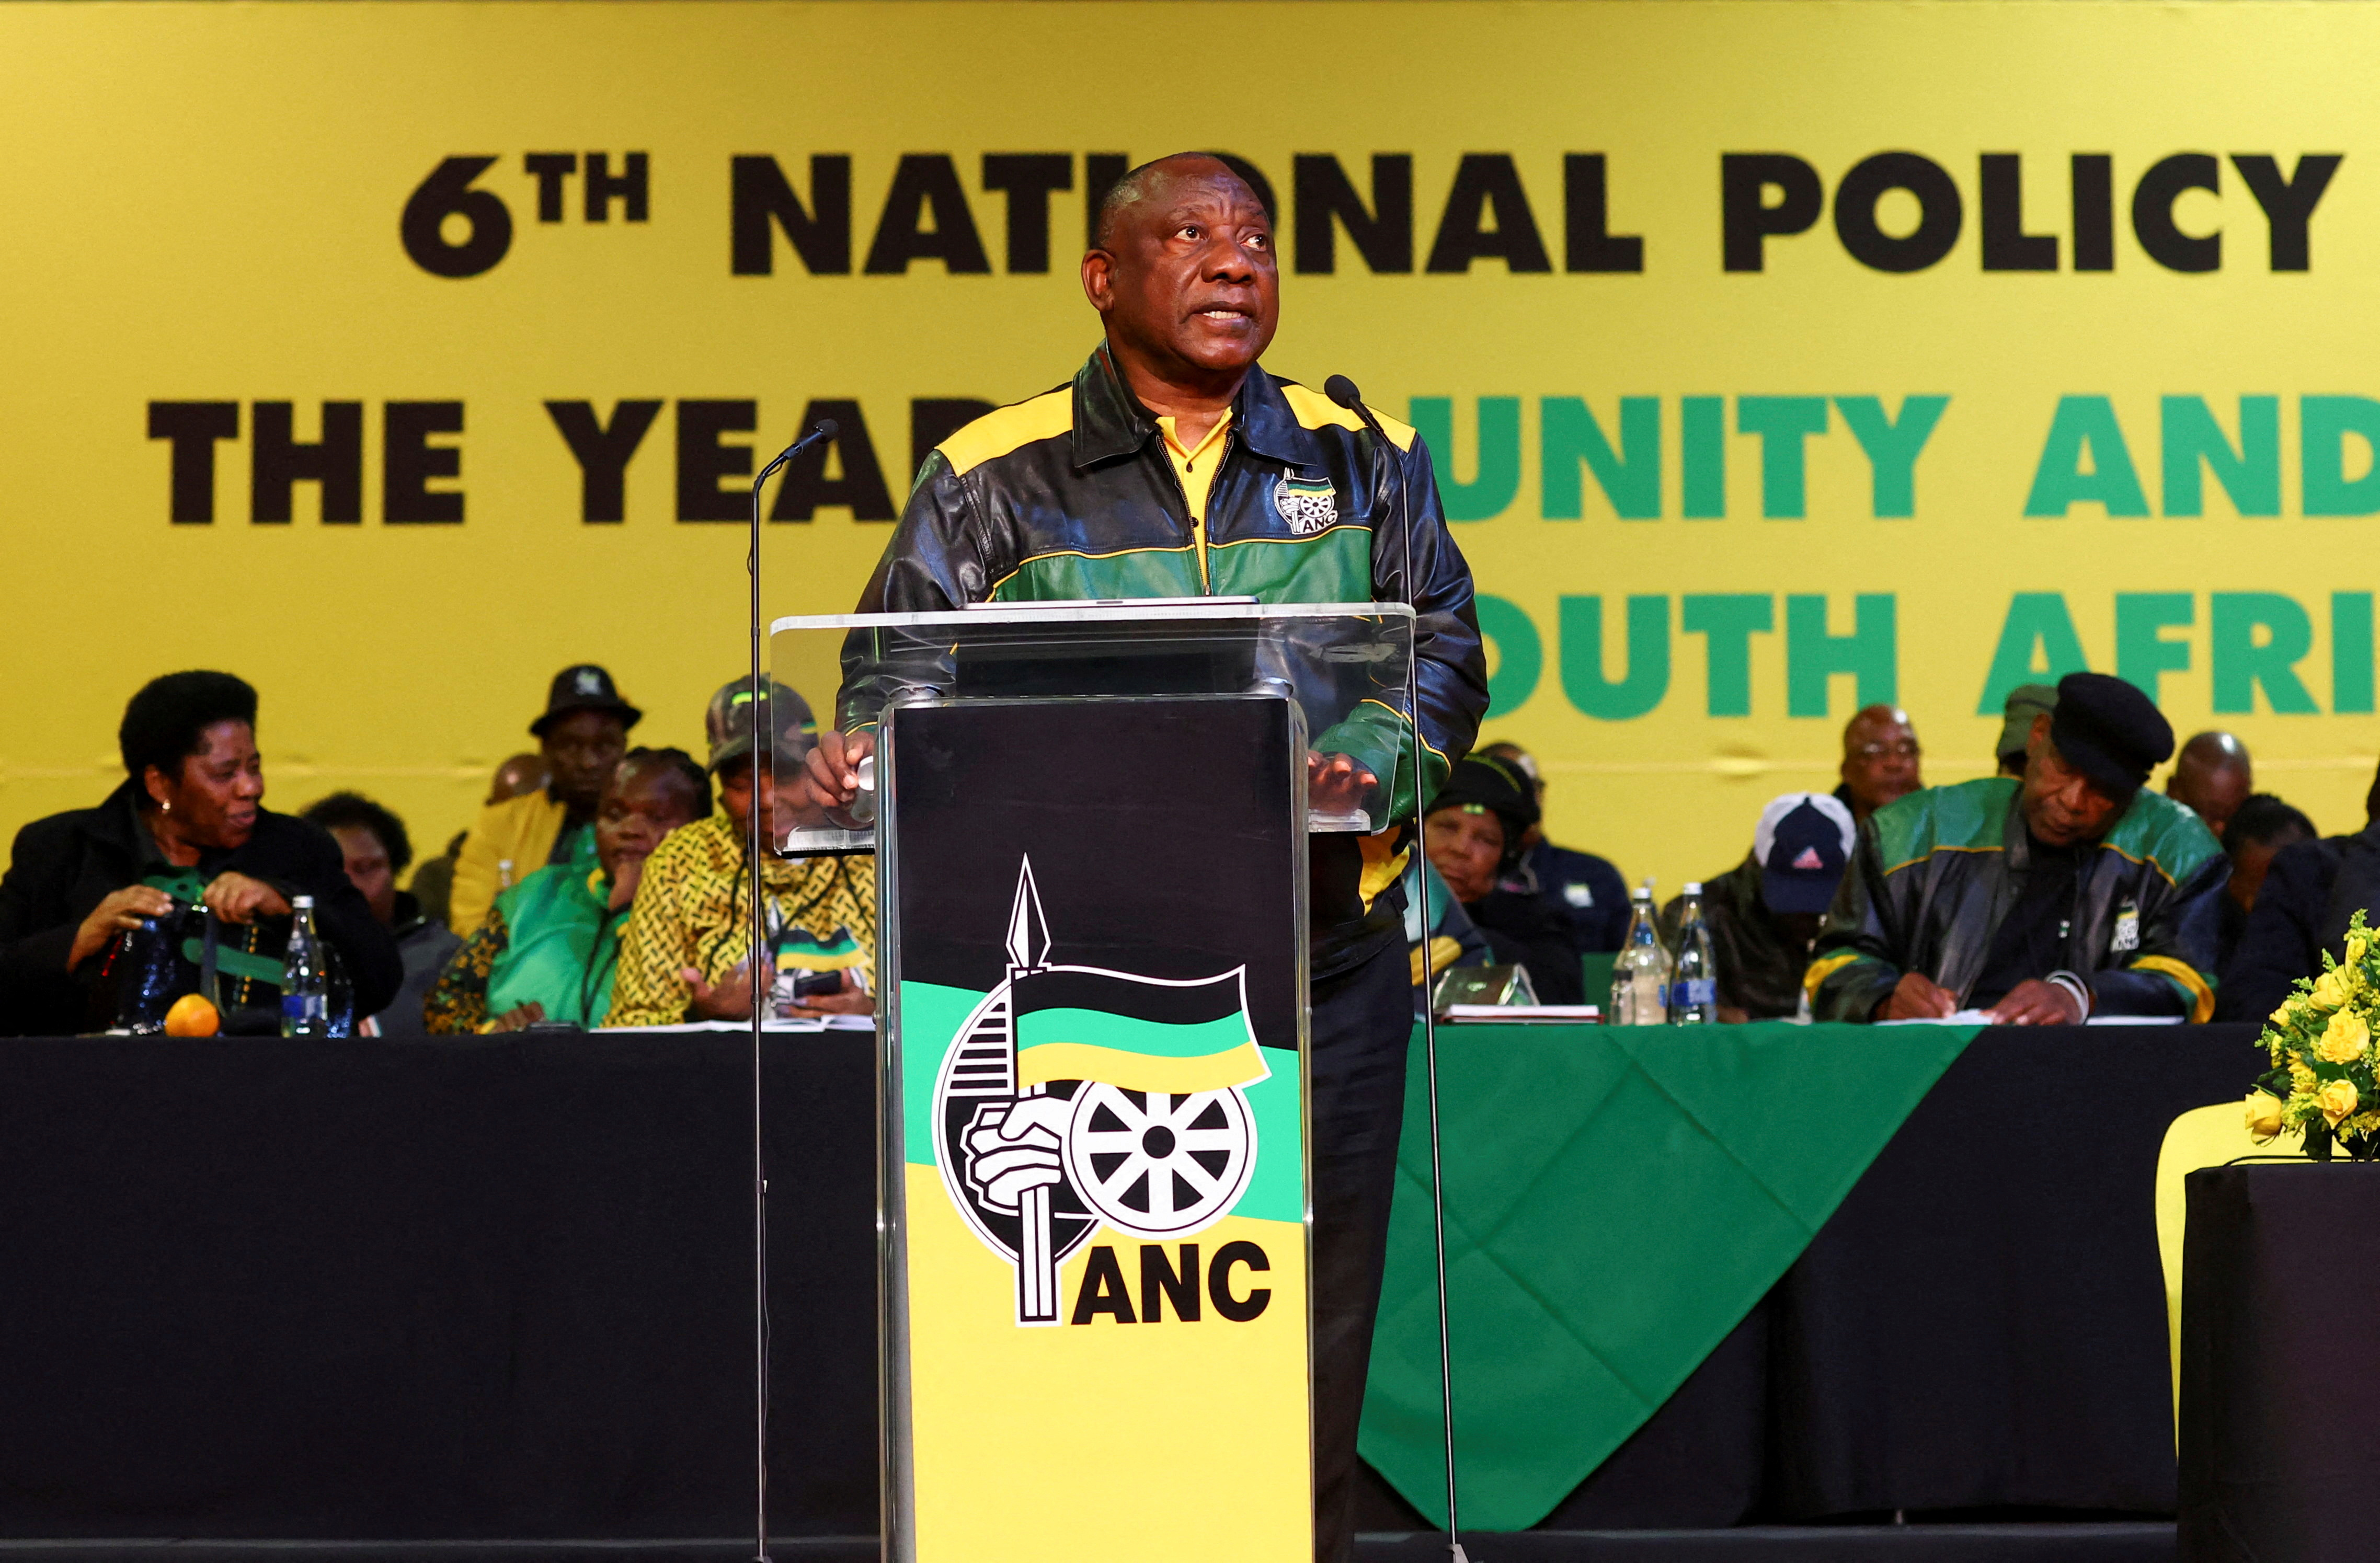 South Africa's ANC party holds national policy conference